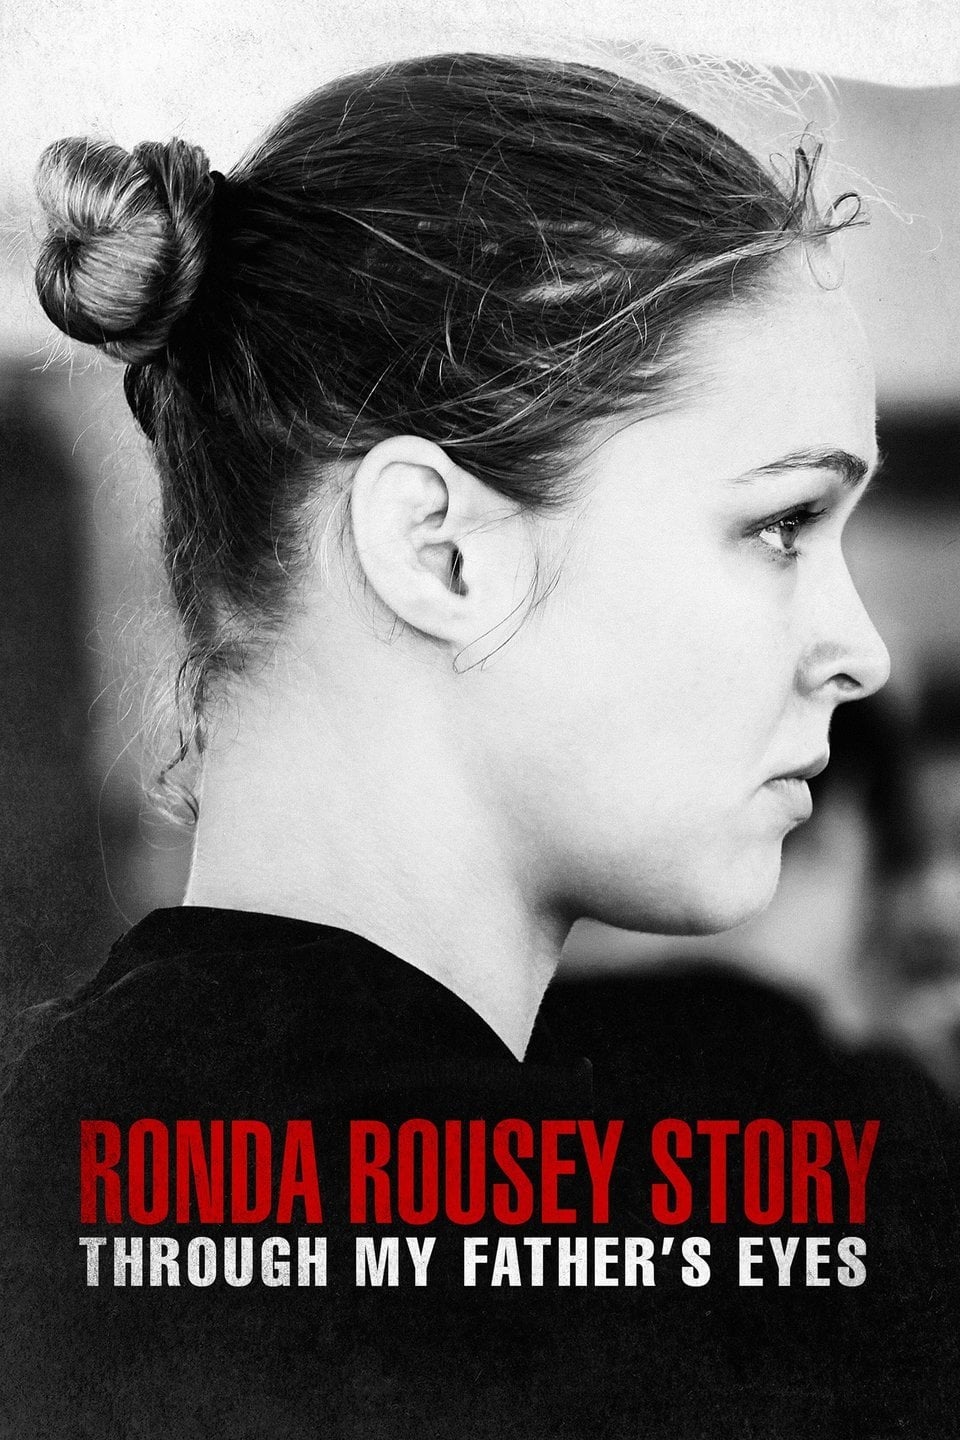 The Ronda Rousey Story: Through My Father's Eyes (2019)